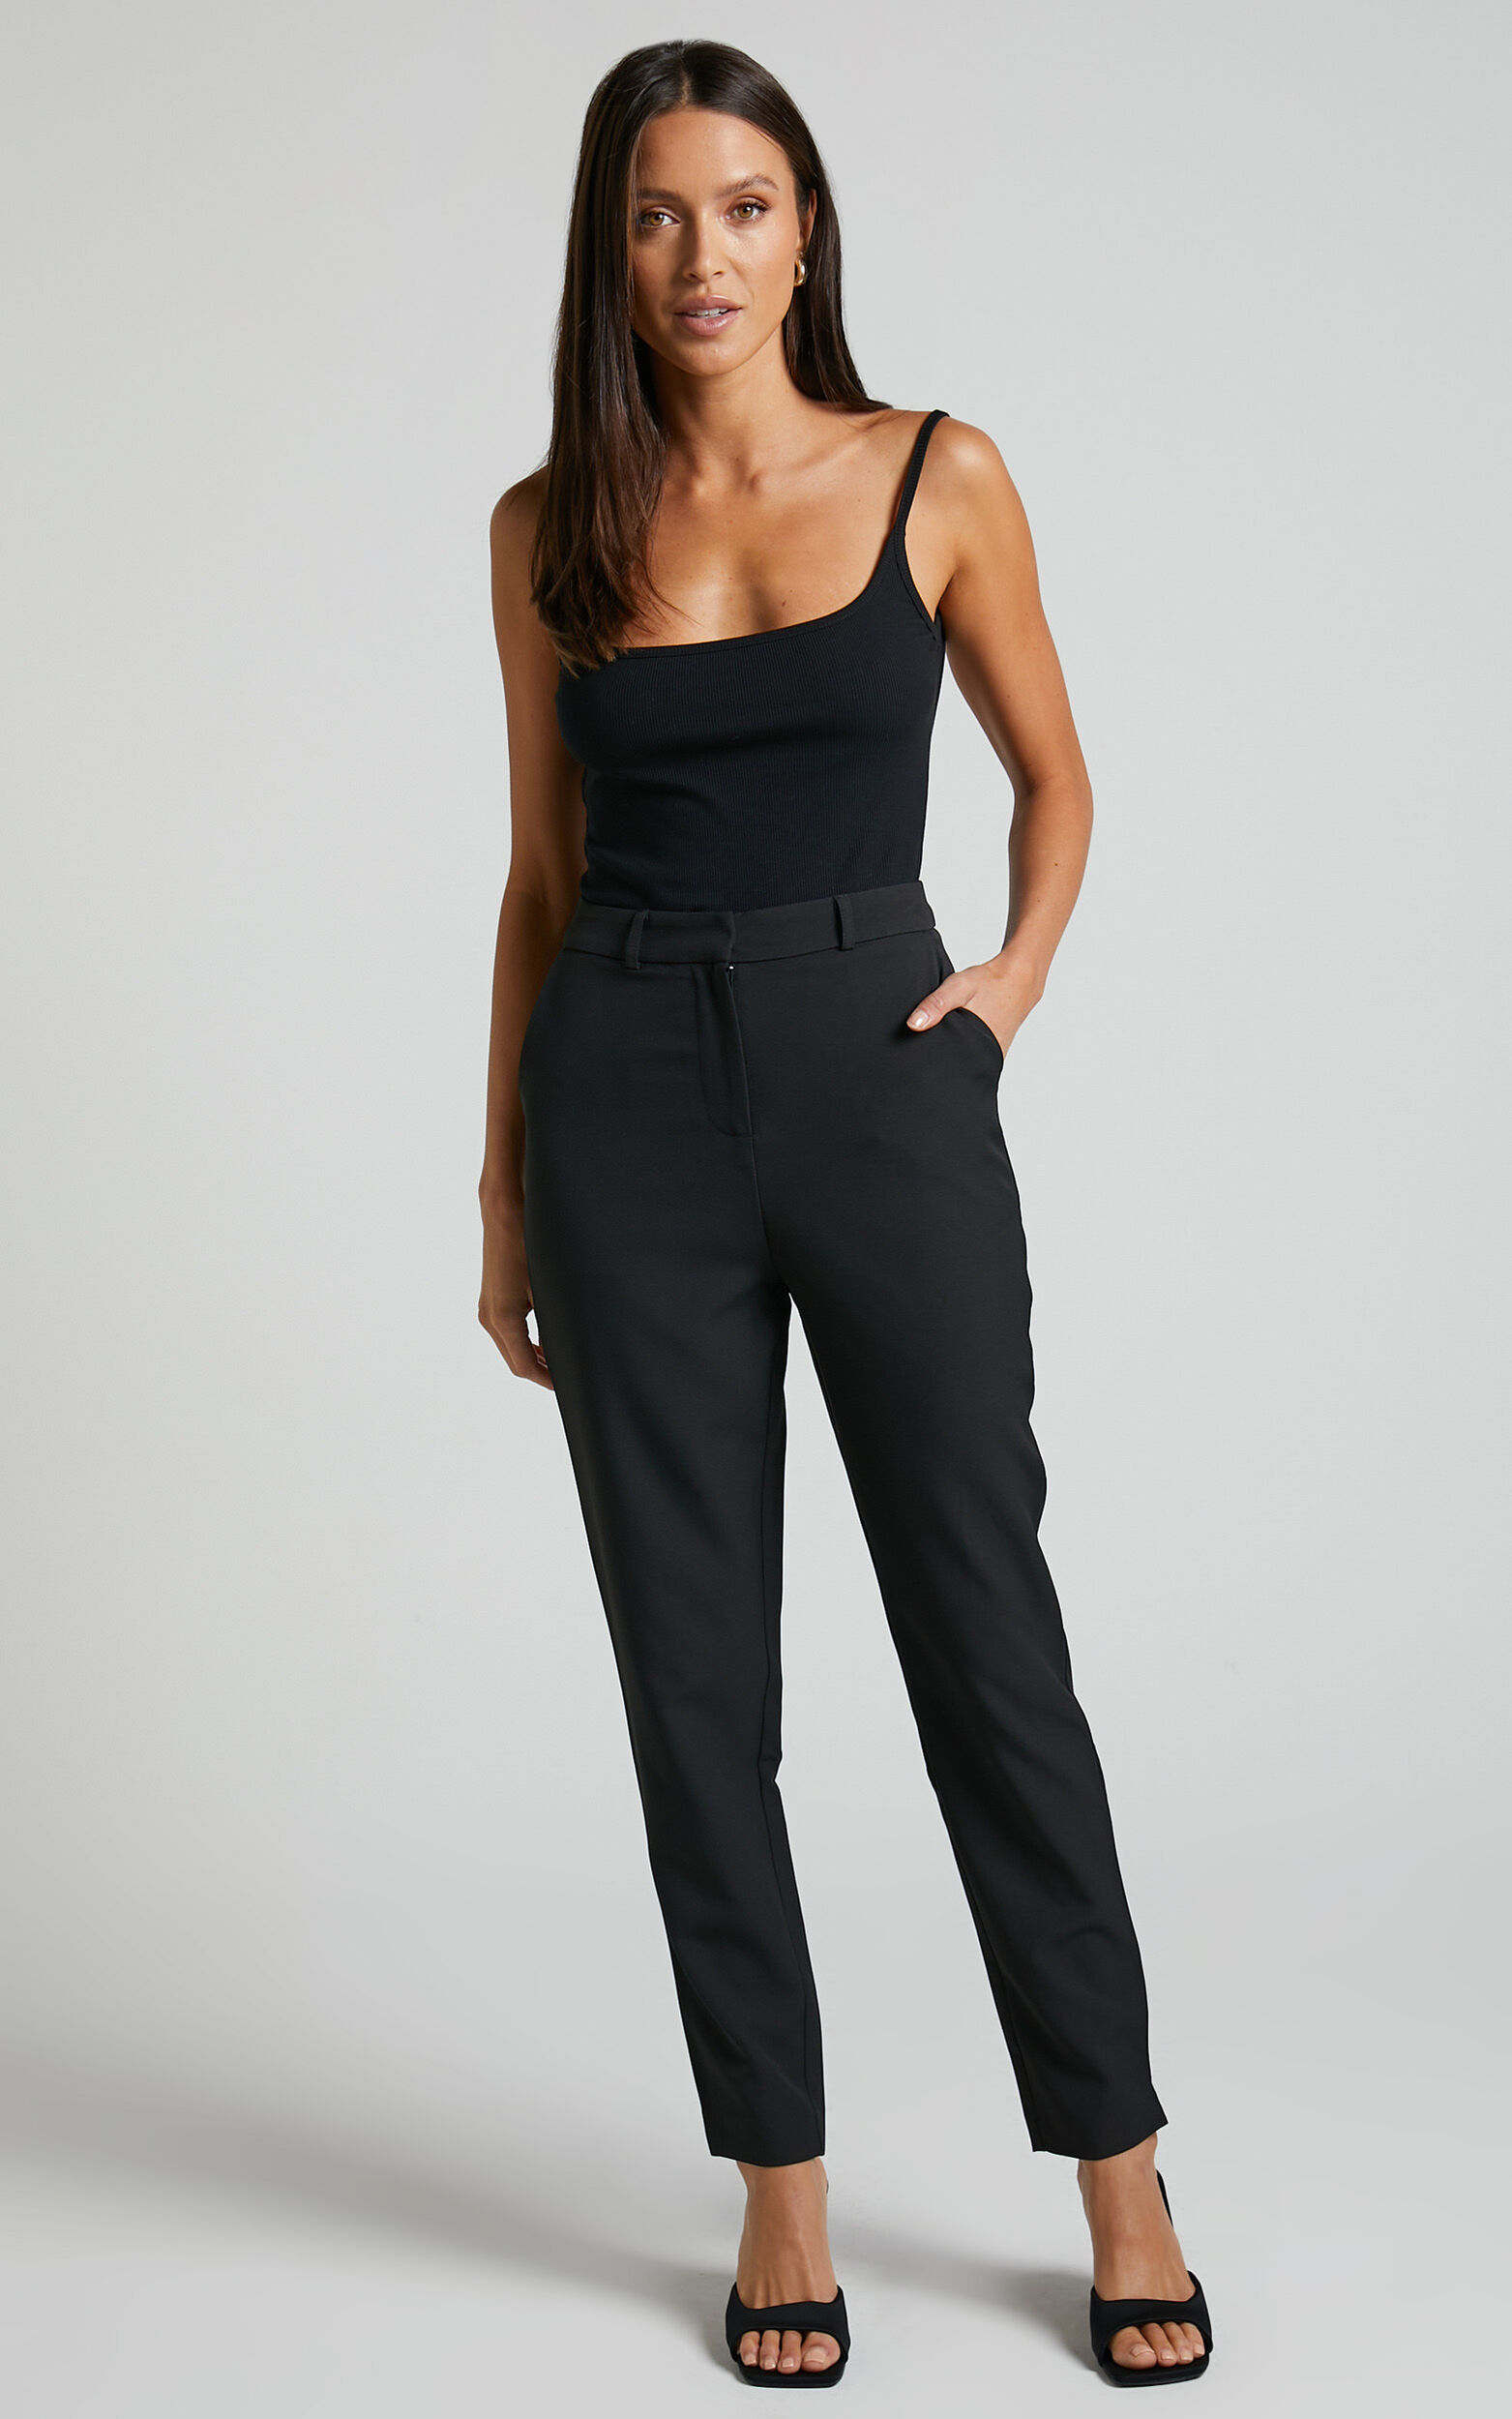 Hermie Pants - High Waisted Cropped Tailored Pants in Black - 04, BLK1